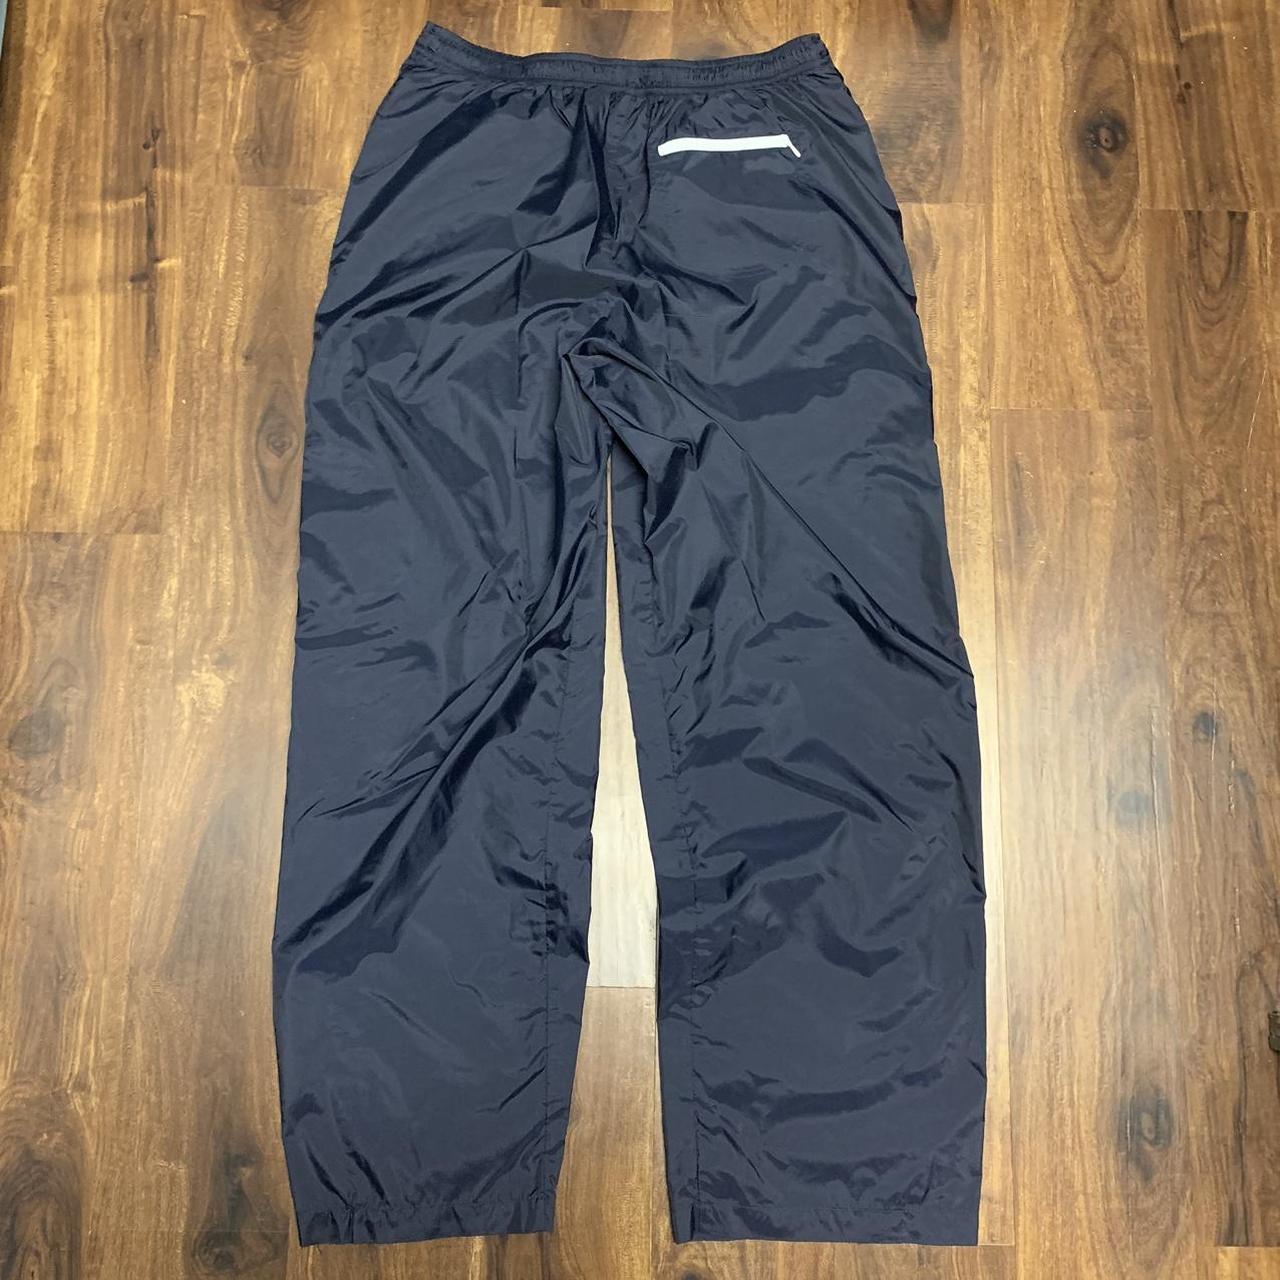 Nike Men's Navy and White Joggers-tracksuits (3)